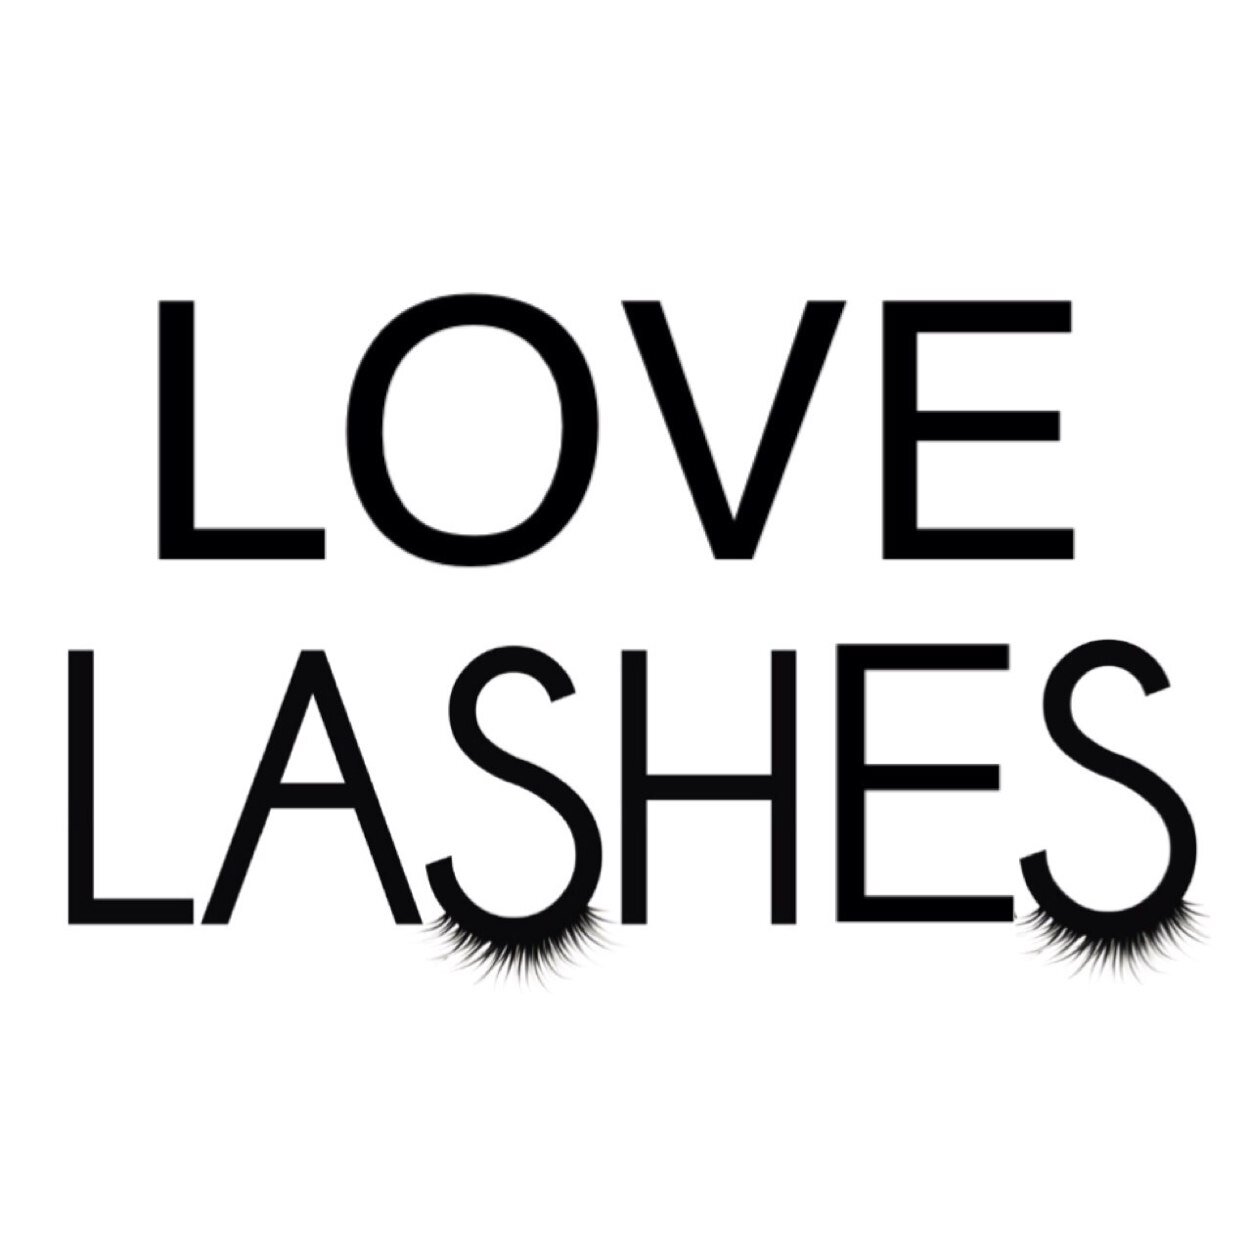 LOVE LASHES is the false eyelashe that made from synthetic. All of them are 100% Hand made by Human. They are soft as same as the real hair.